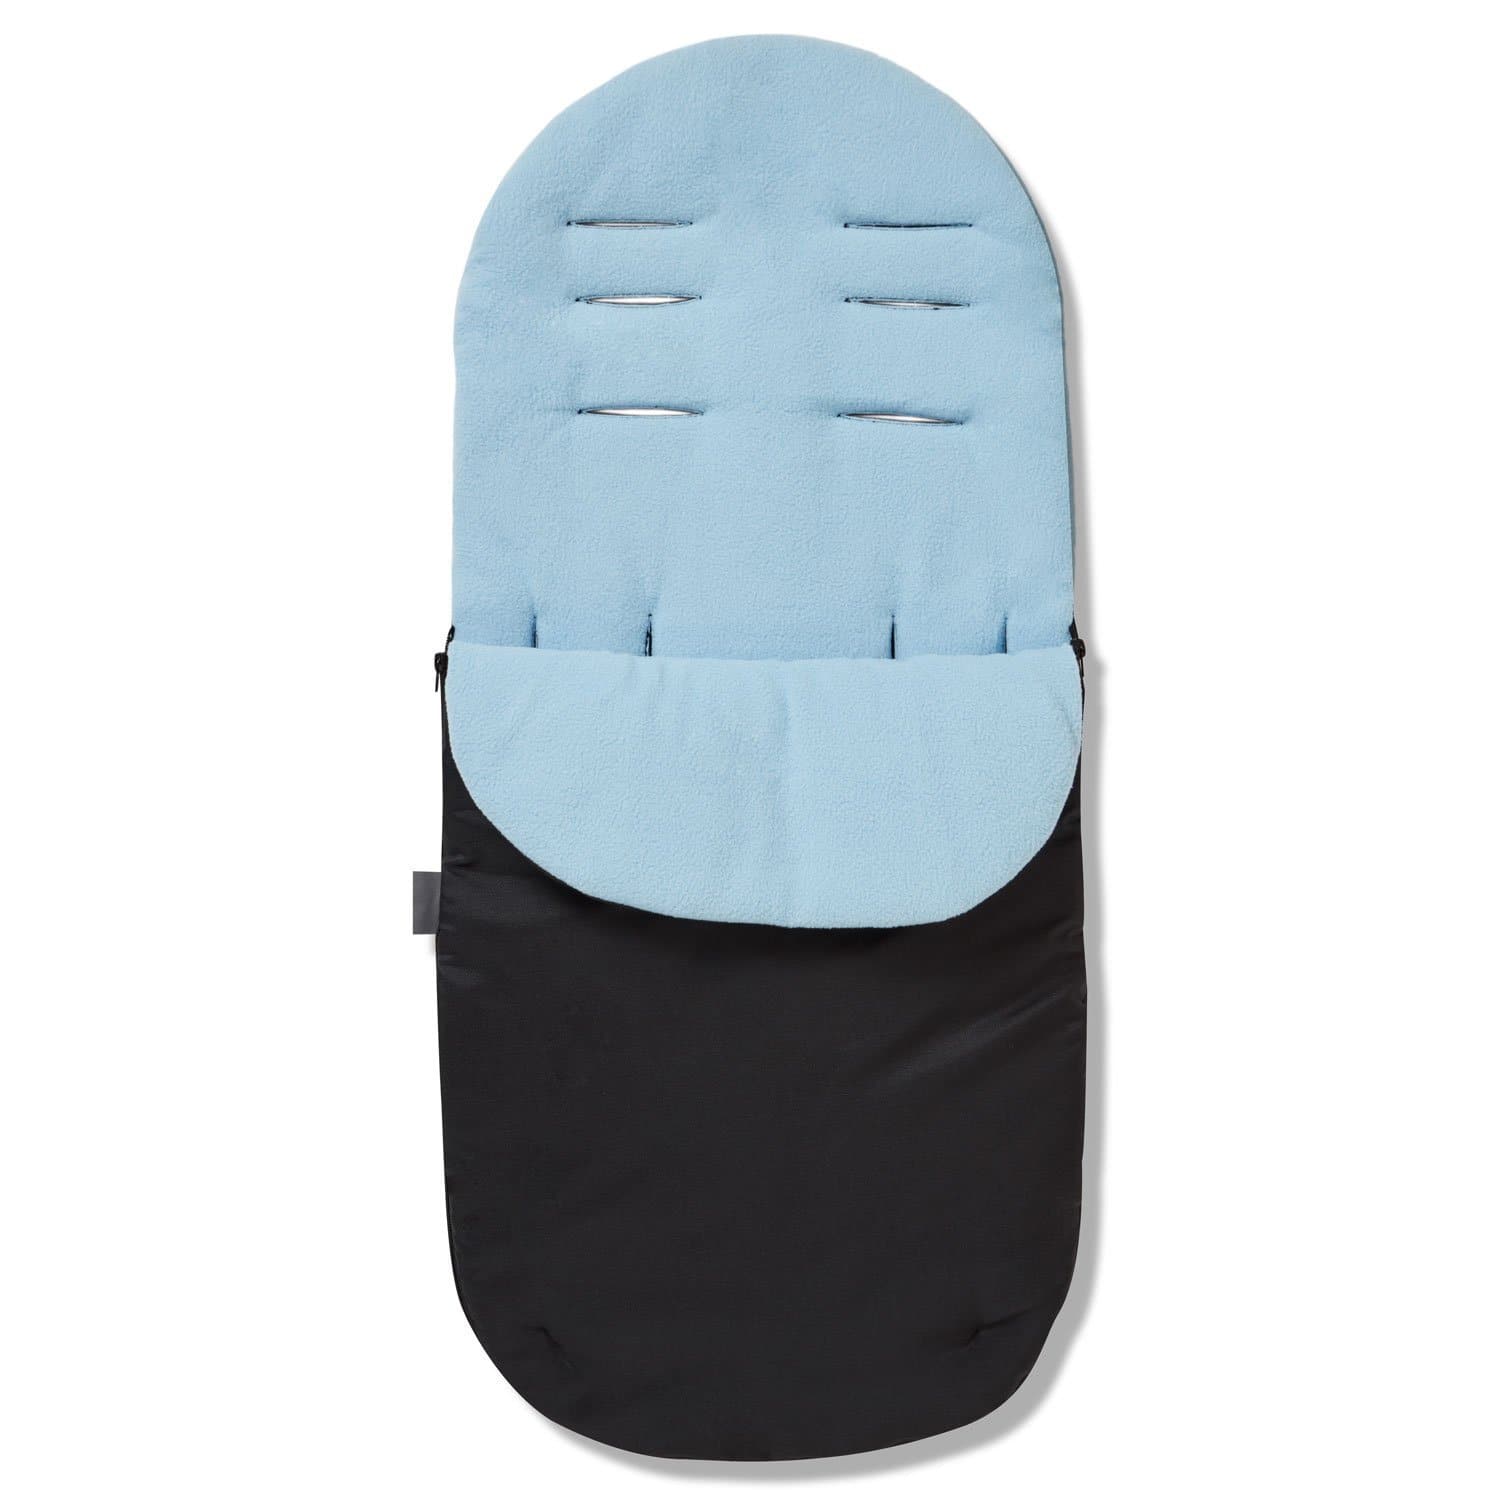 Footmuff / Cosy Toes Compatible with Zooper - Light Blue / Fits All Models | For Your Little One